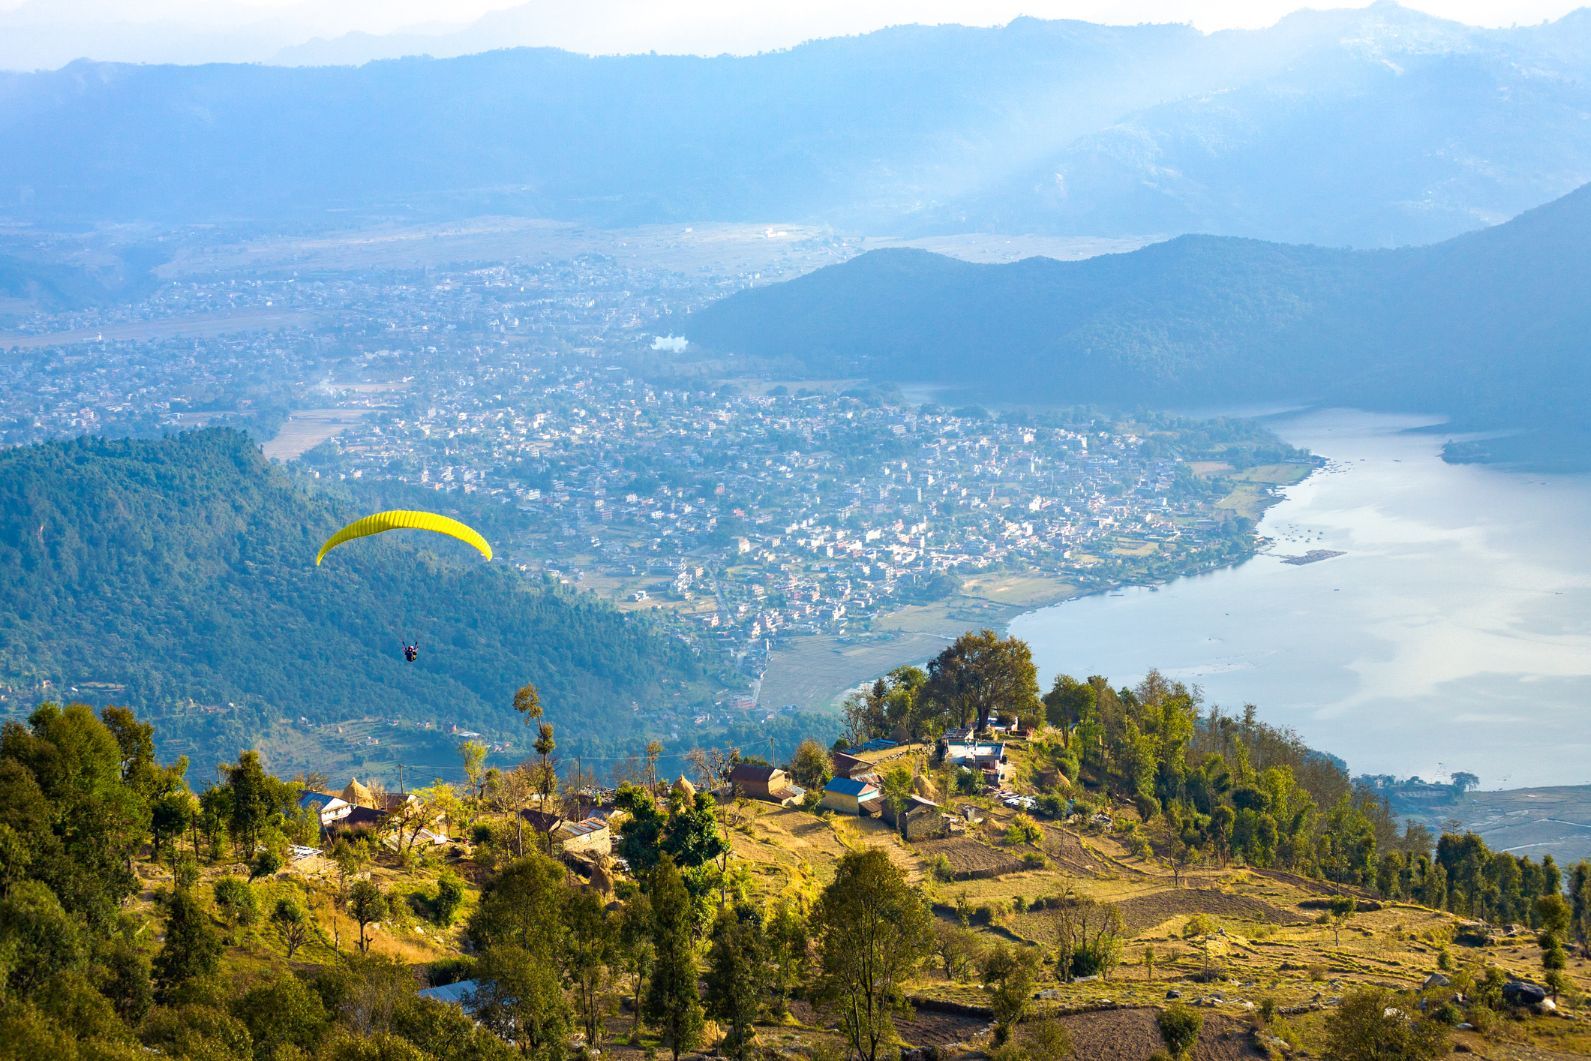 A paraglider descends onto the central hub of Pokhara and Phewa Lake, as seen from Sarangkot, Nepal. Photo: Getty